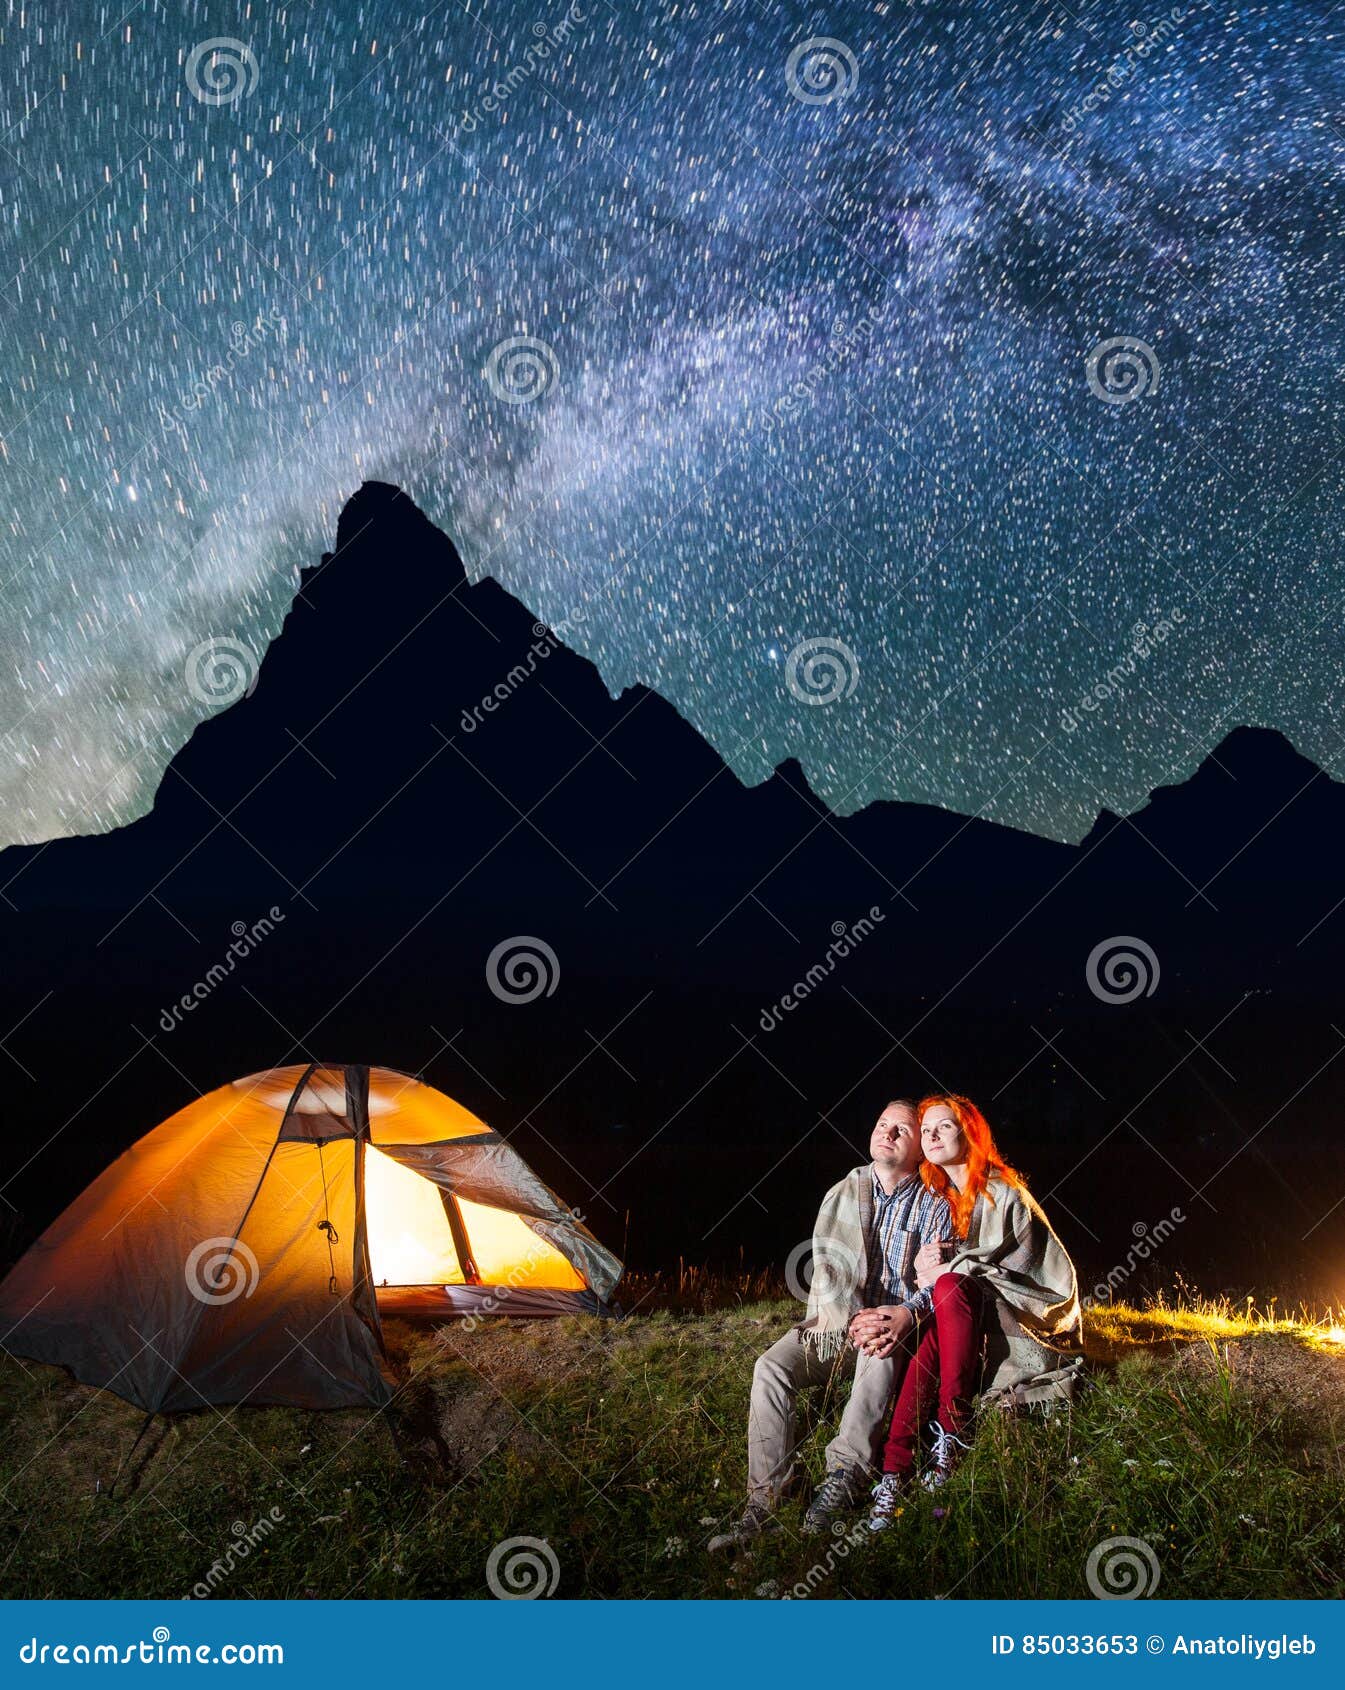 https://thumbs.dreamstime.com/z/two-lovers-hikers-sitting-together-near-campfire-shines-camp-night-under-stars-looking-to-starry-sky-covered-85033653.jpg